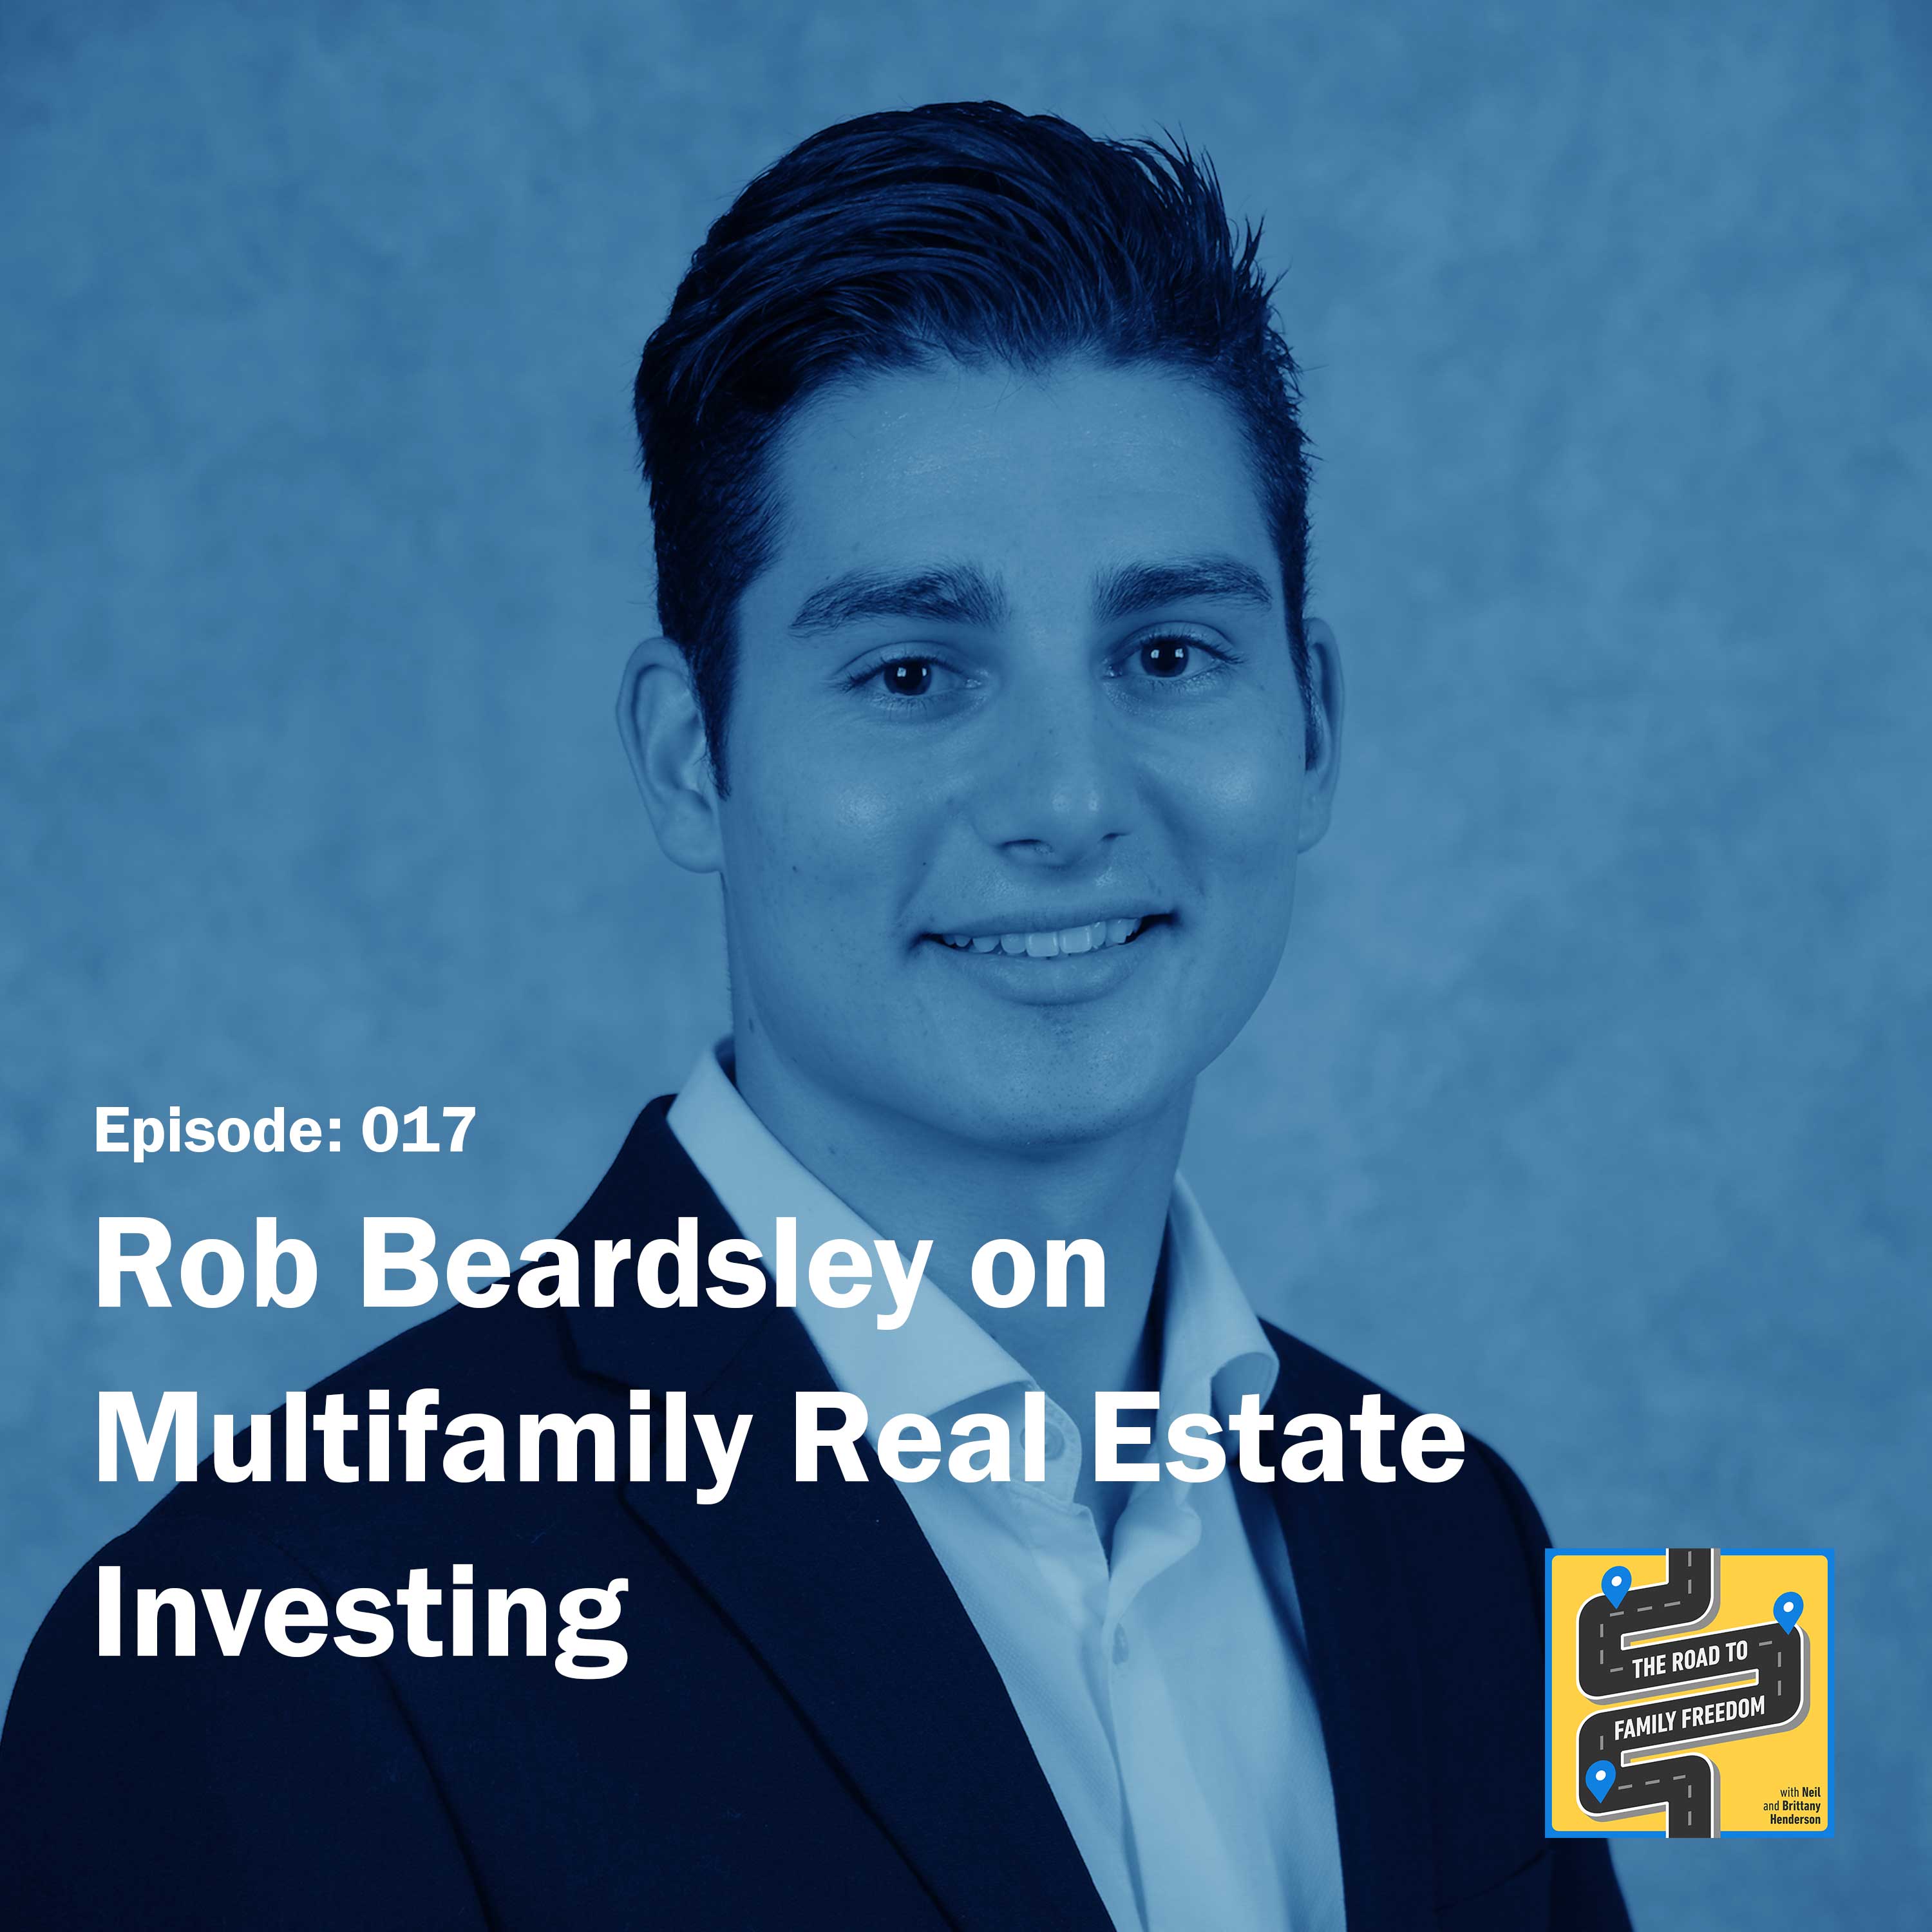 Multifamily Real Estate Investing with Rob Beardsley